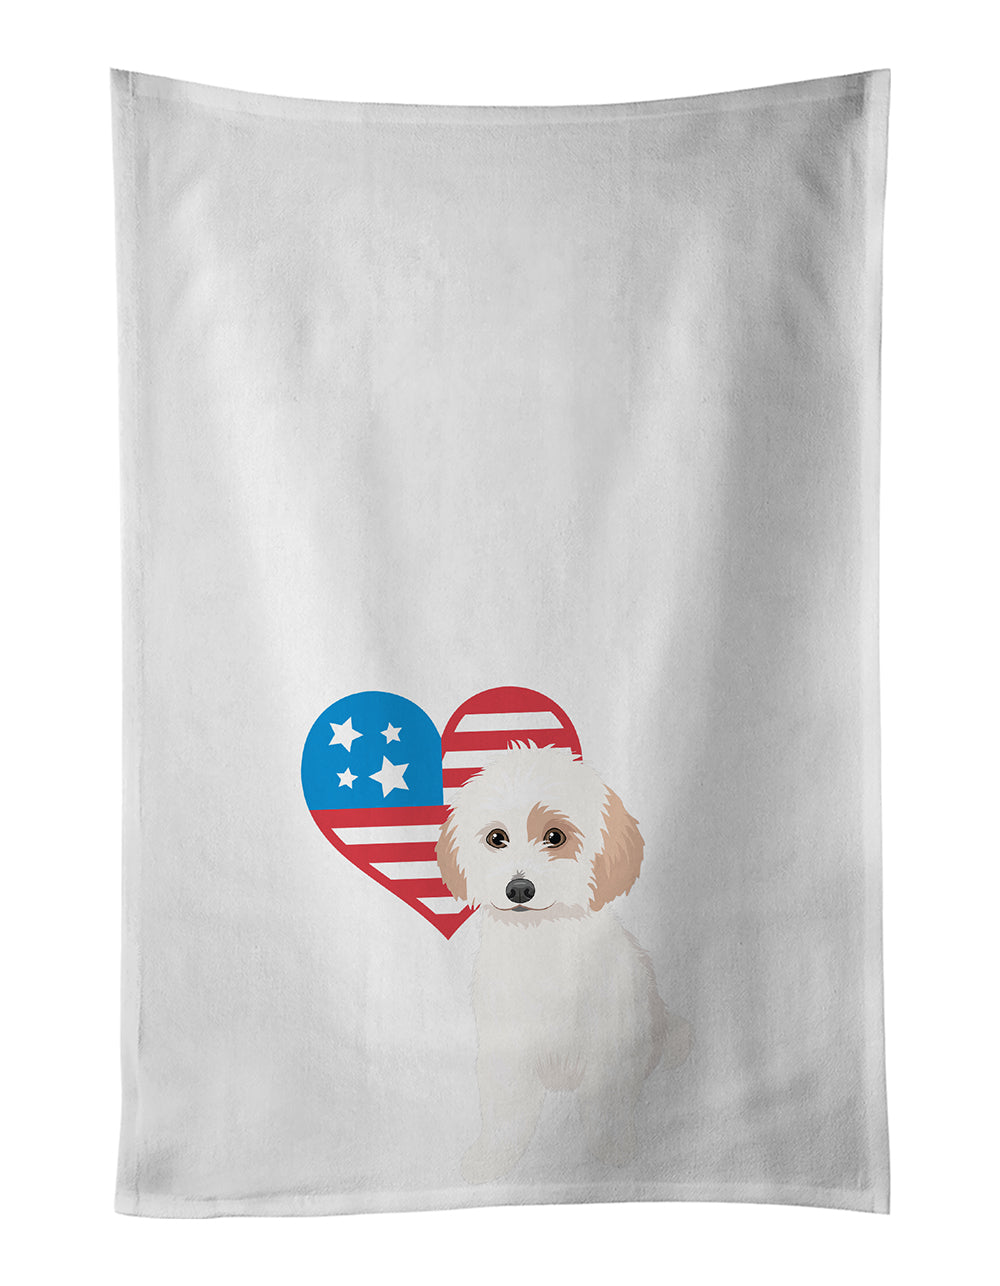 Buy this Shih-Tzu White and Red Patriotic White Kitchen Towel Set of 2